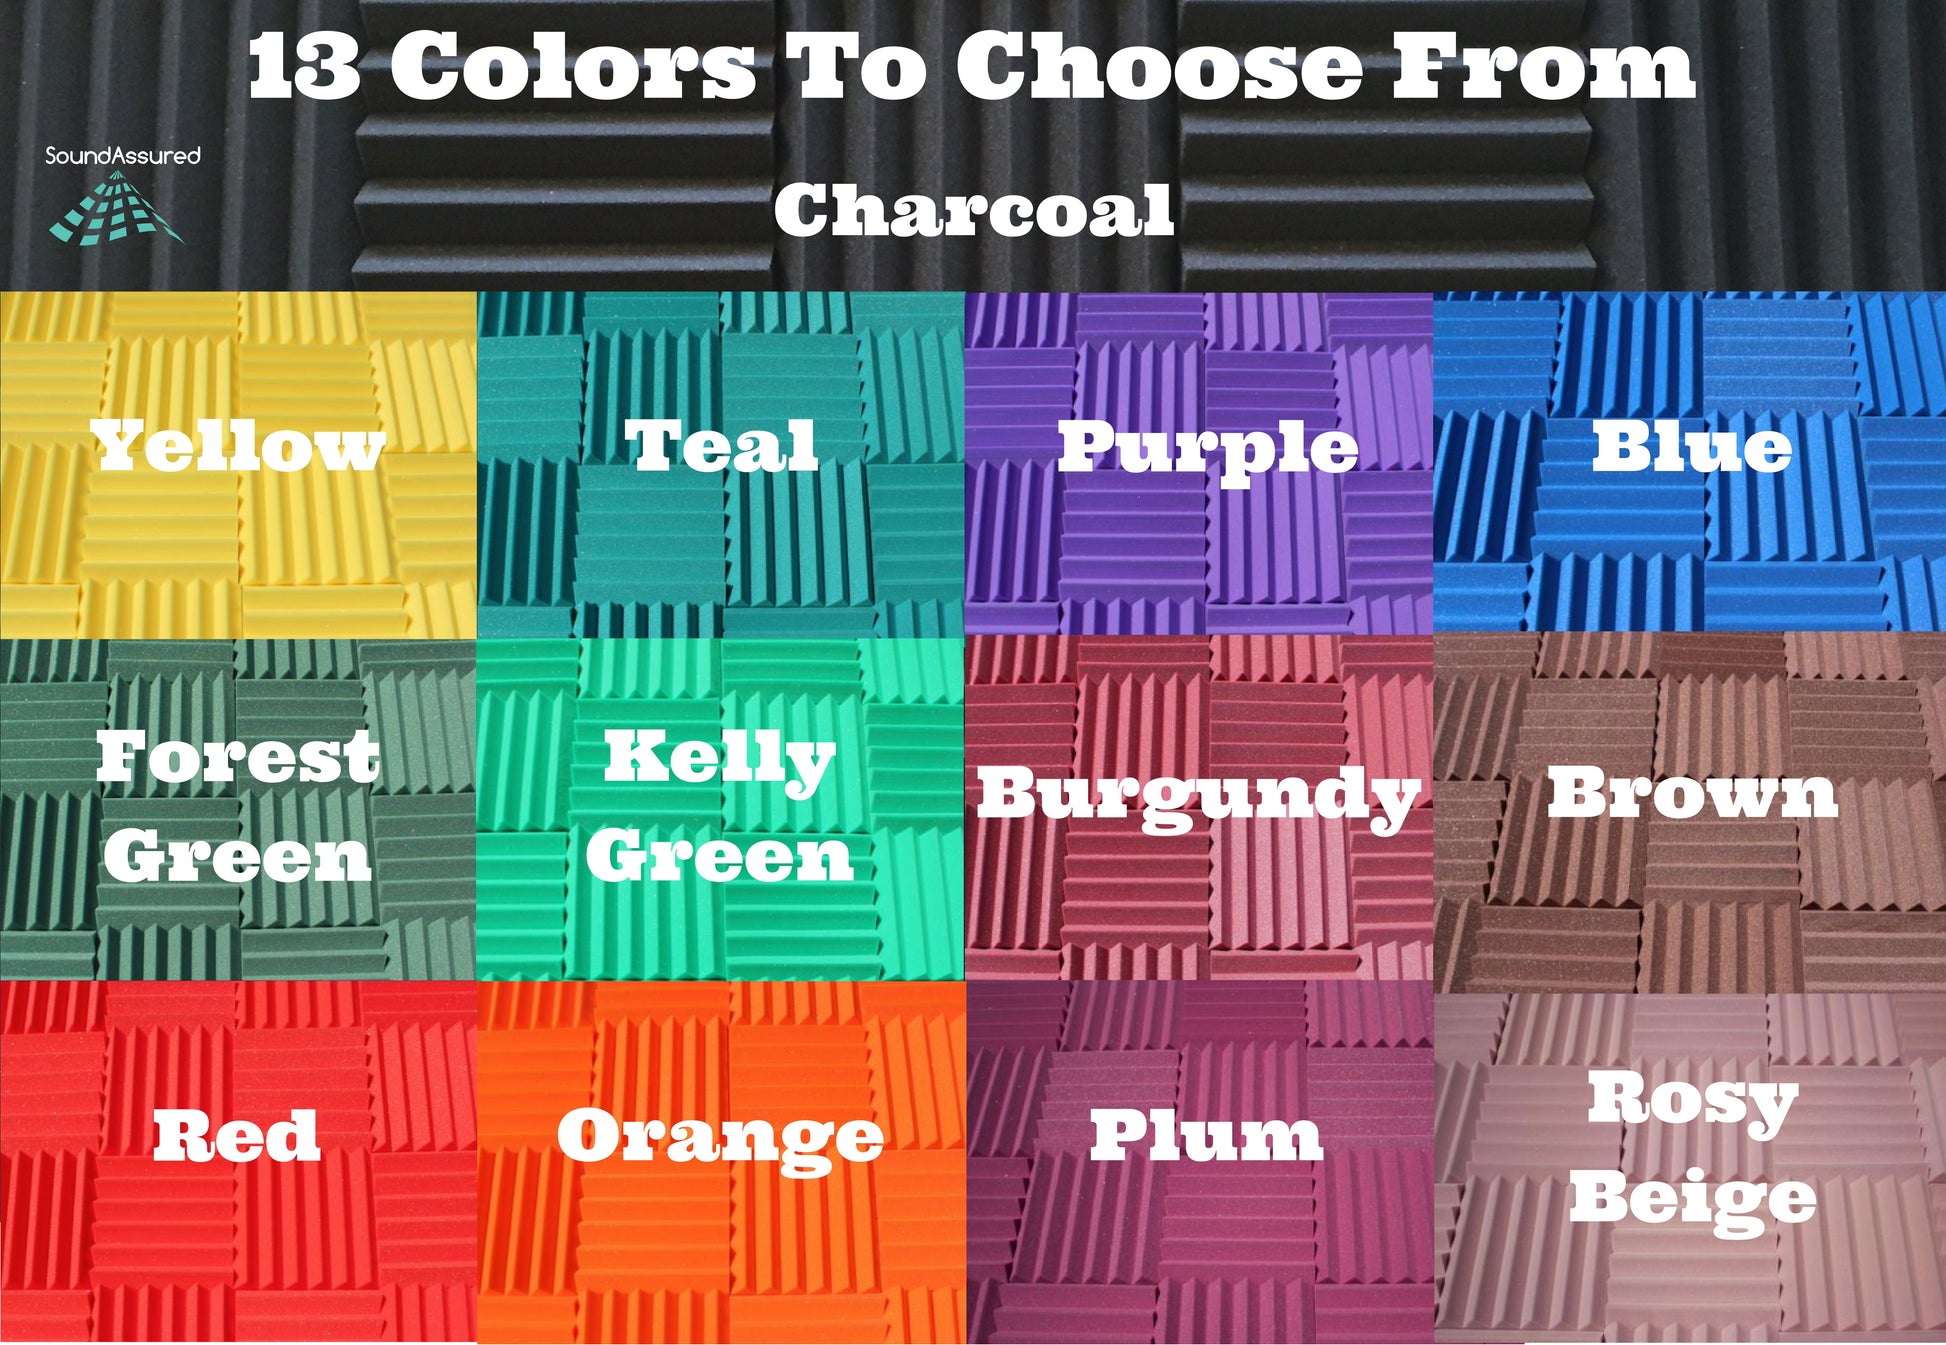 this is an image of a color grid showing 13 color options for acoustic foam panels.  Blue Brown Burgundy Charcoal Forest Green Kelly Green Orange Plum Purple Red Rosy Beige Teal and Yellow